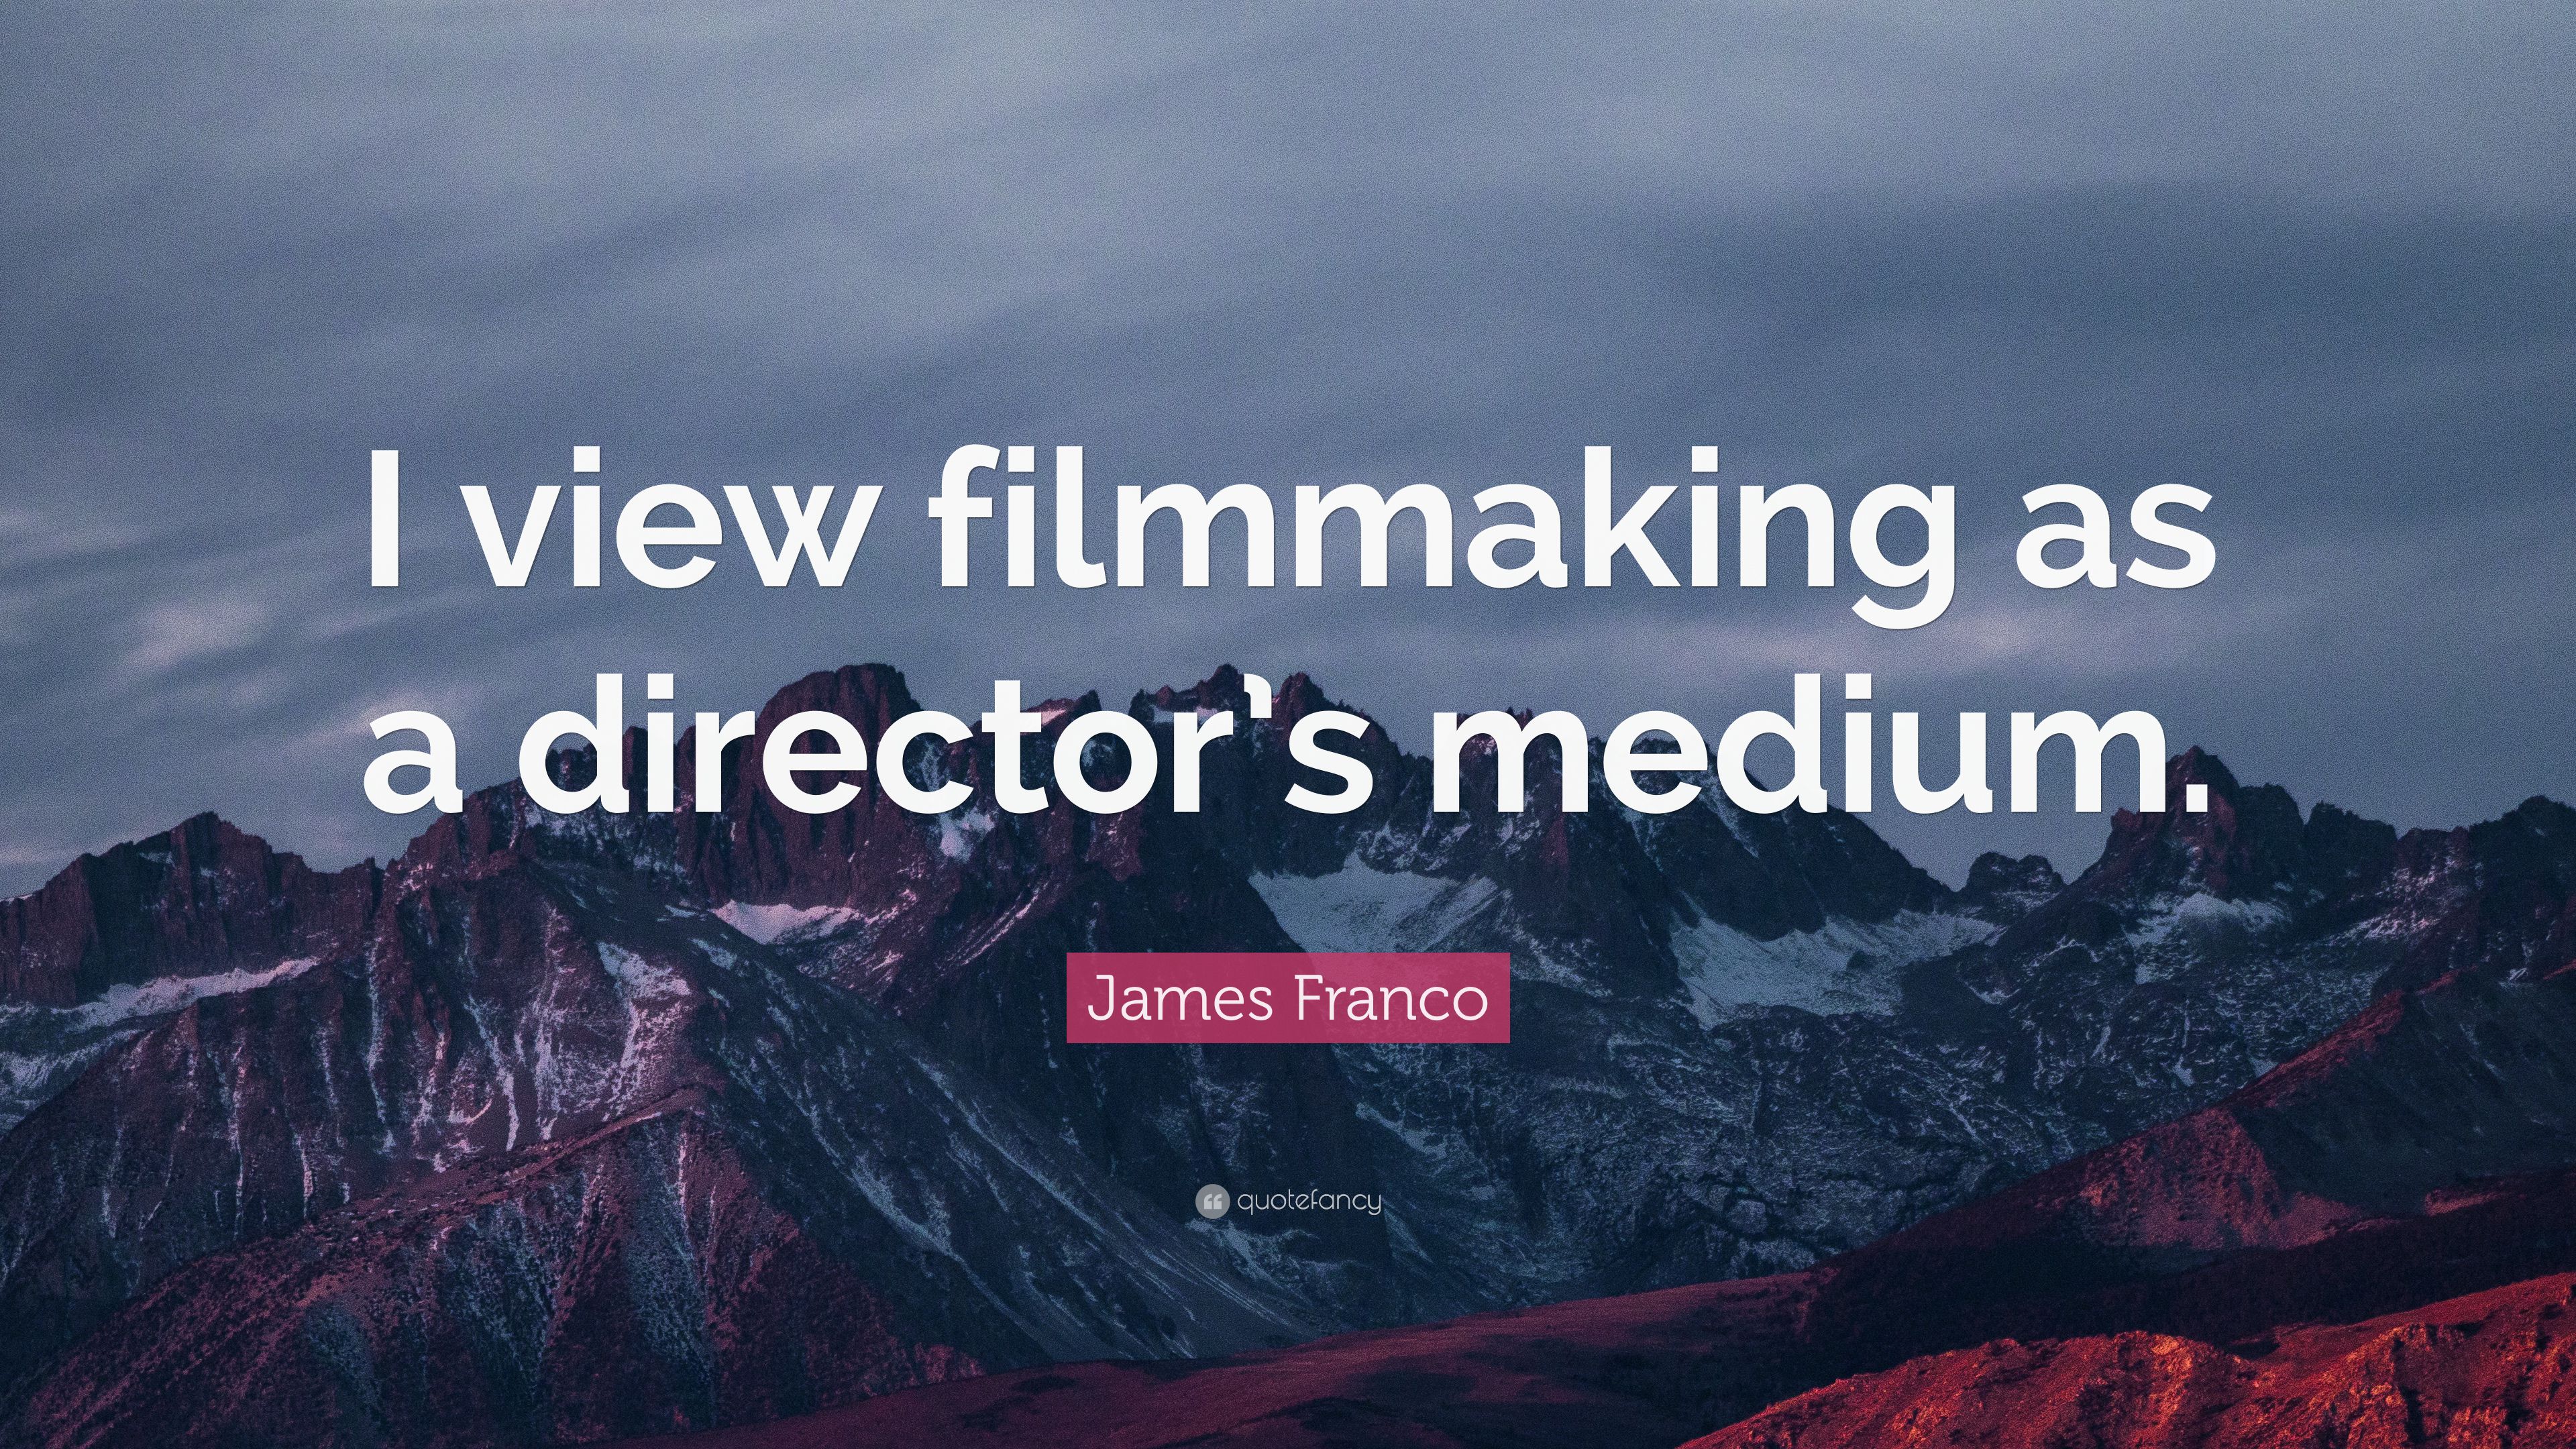 James Franco Quote: “I view filmmaking as a director's medium.” 7